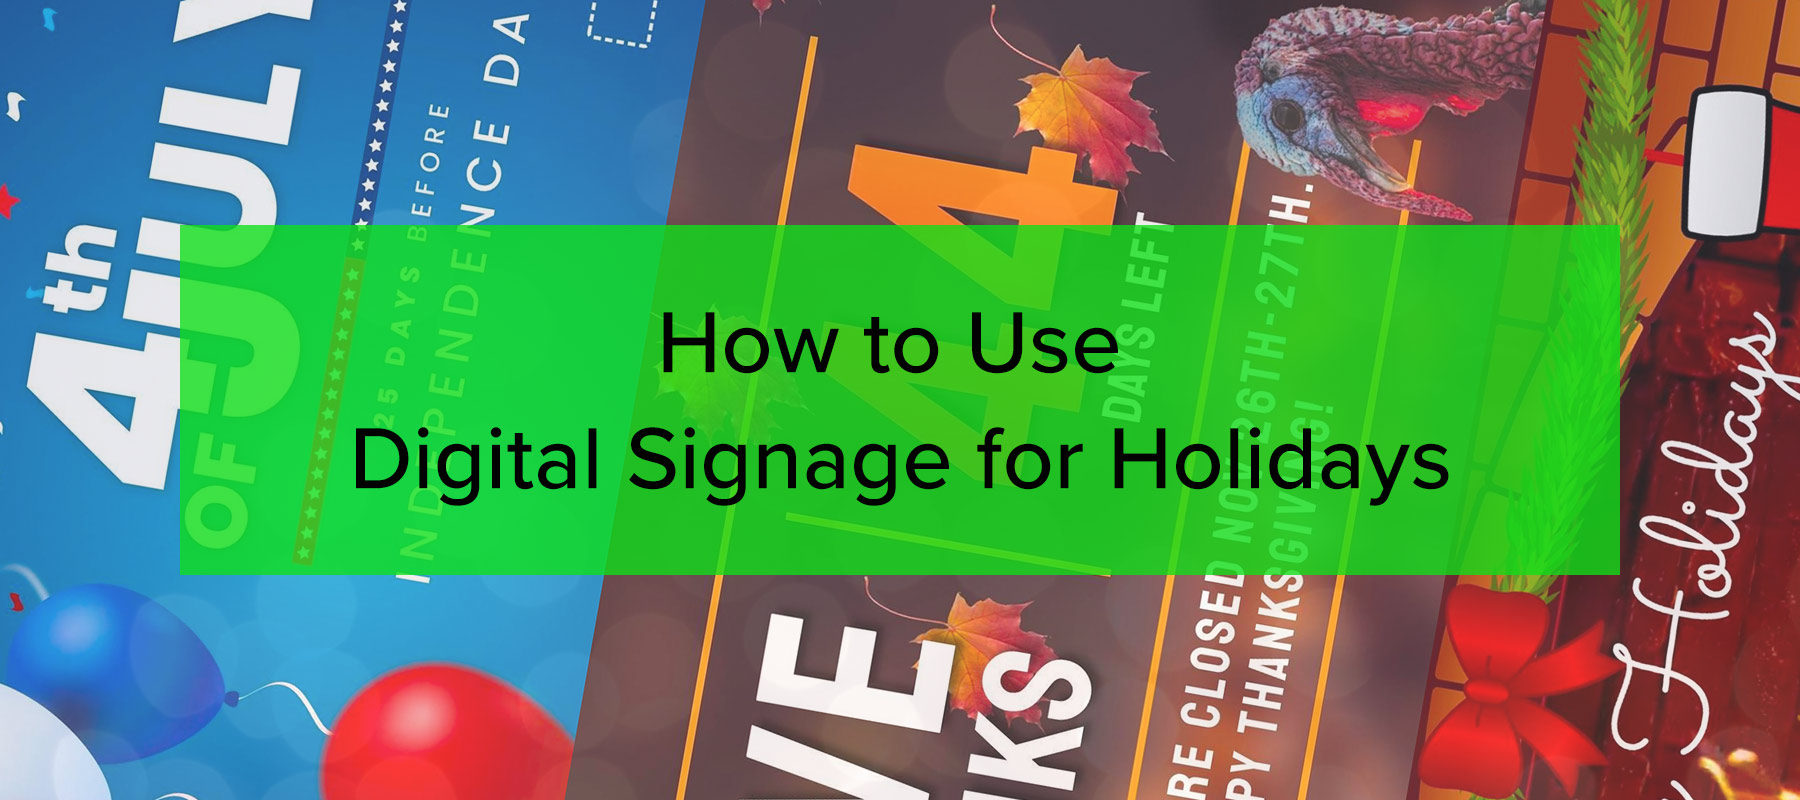 How to Use Digital Signage for Holidays